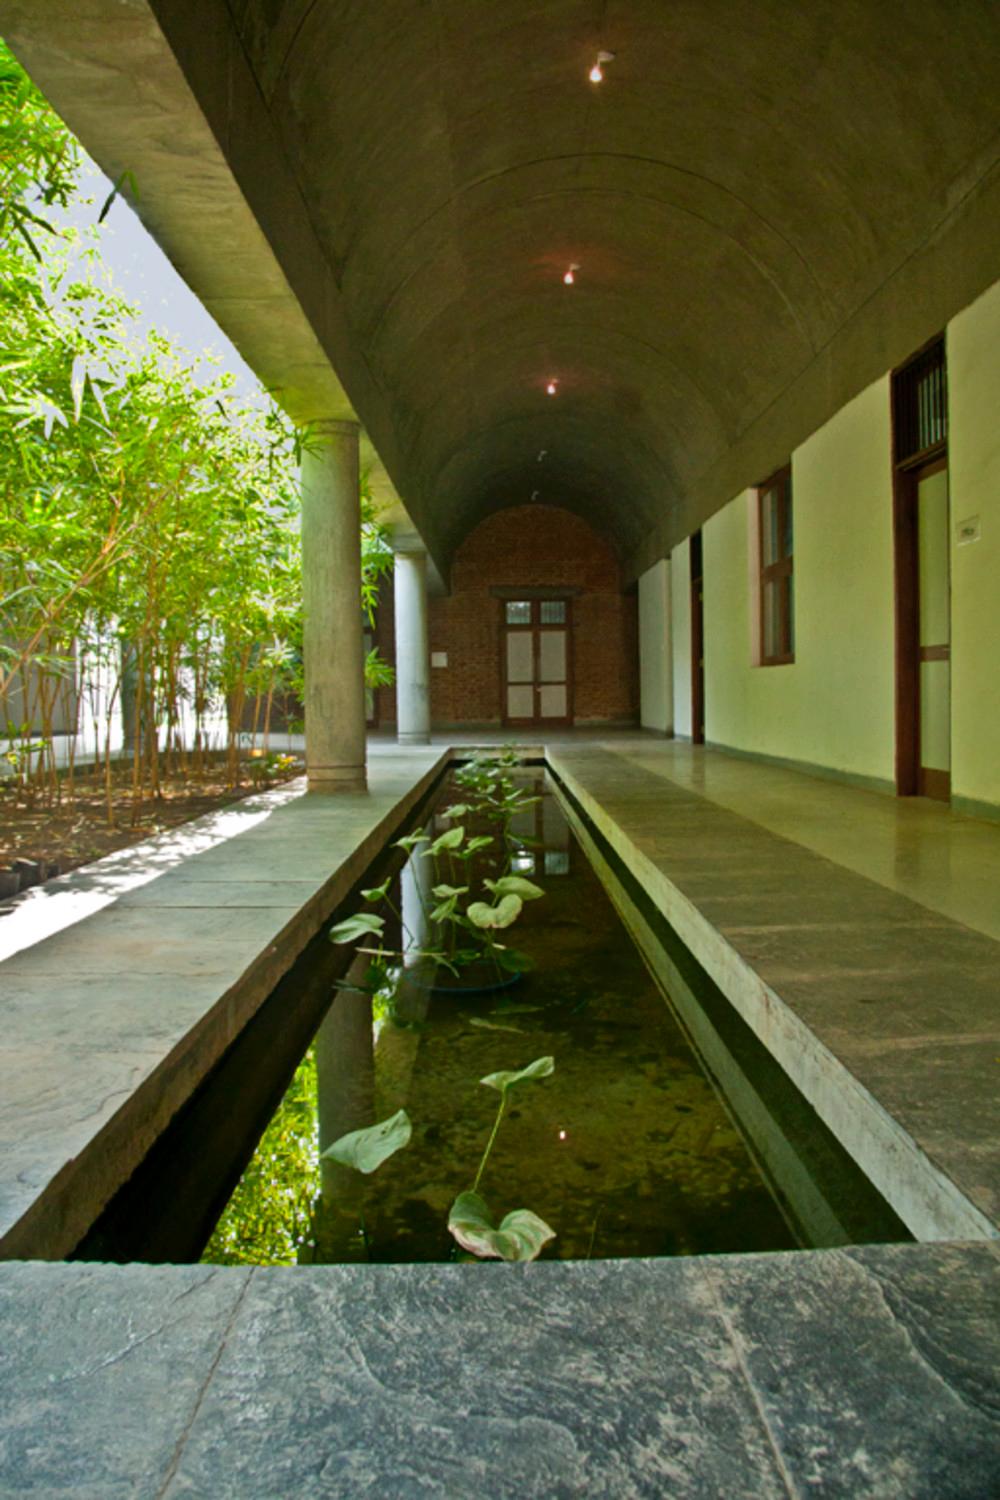 A central water body and bamboo court segregates the exhibition space and administration areas